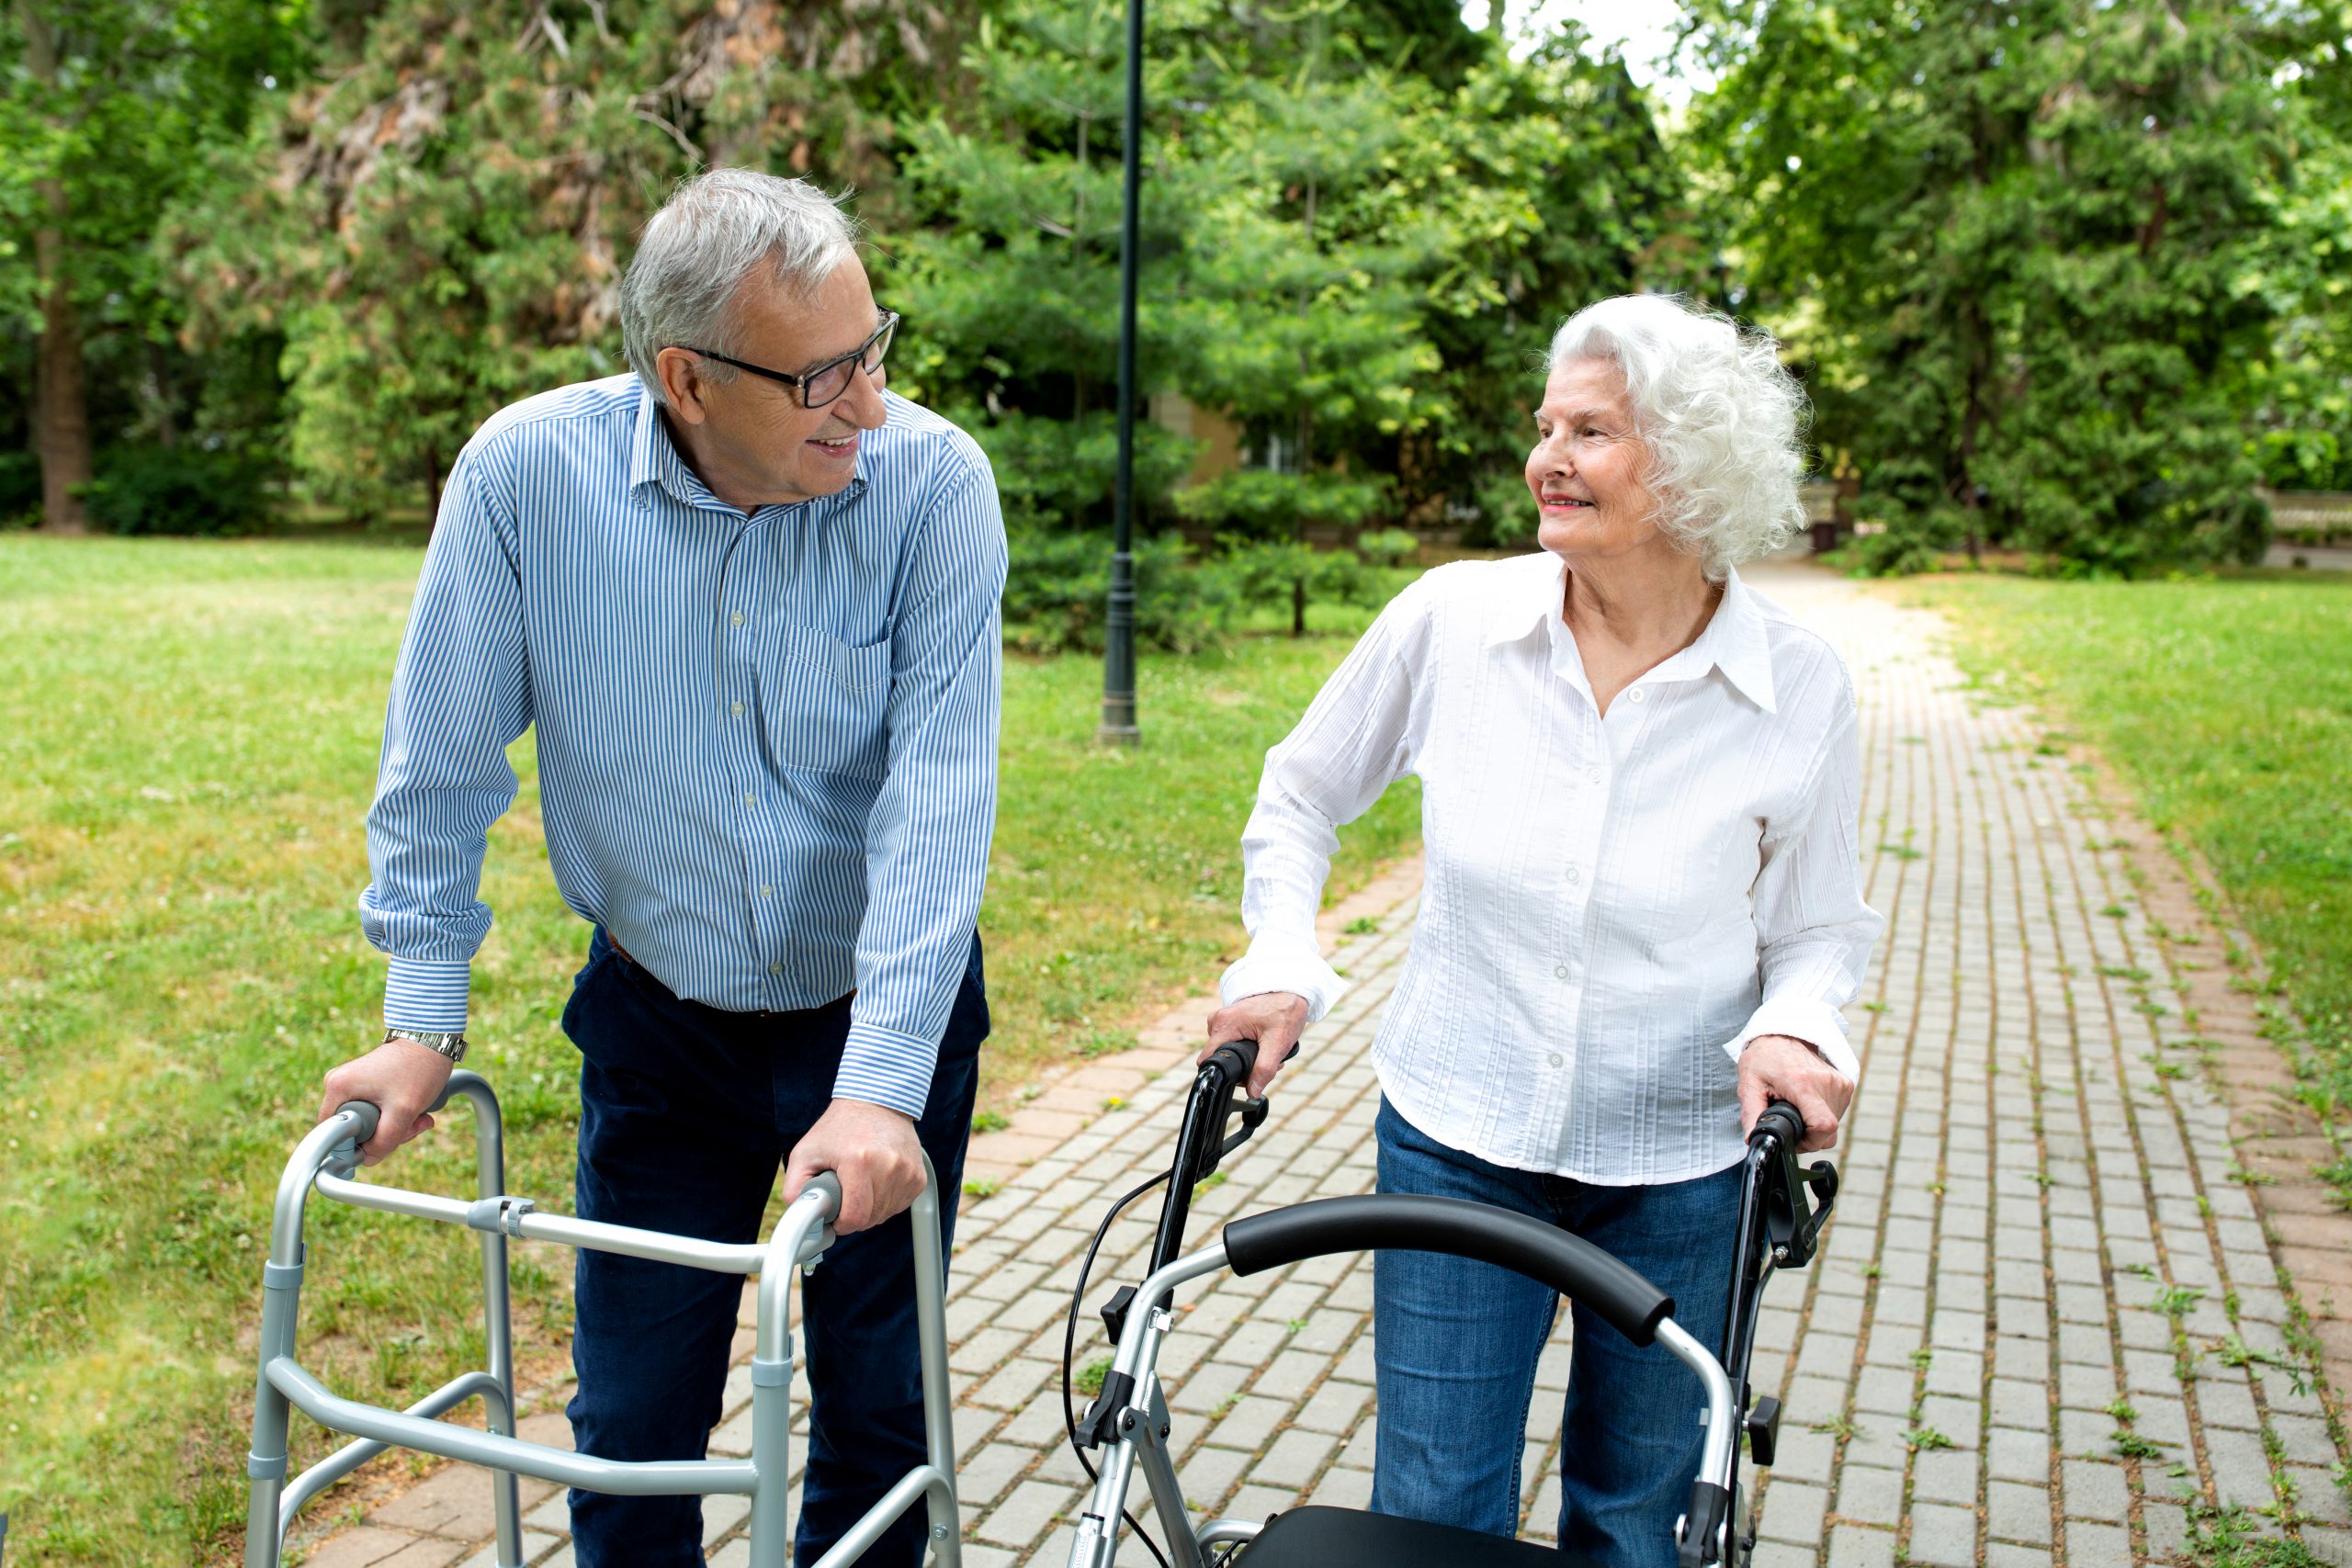 An unexpected elderly fall can be fatal or have serious complications.